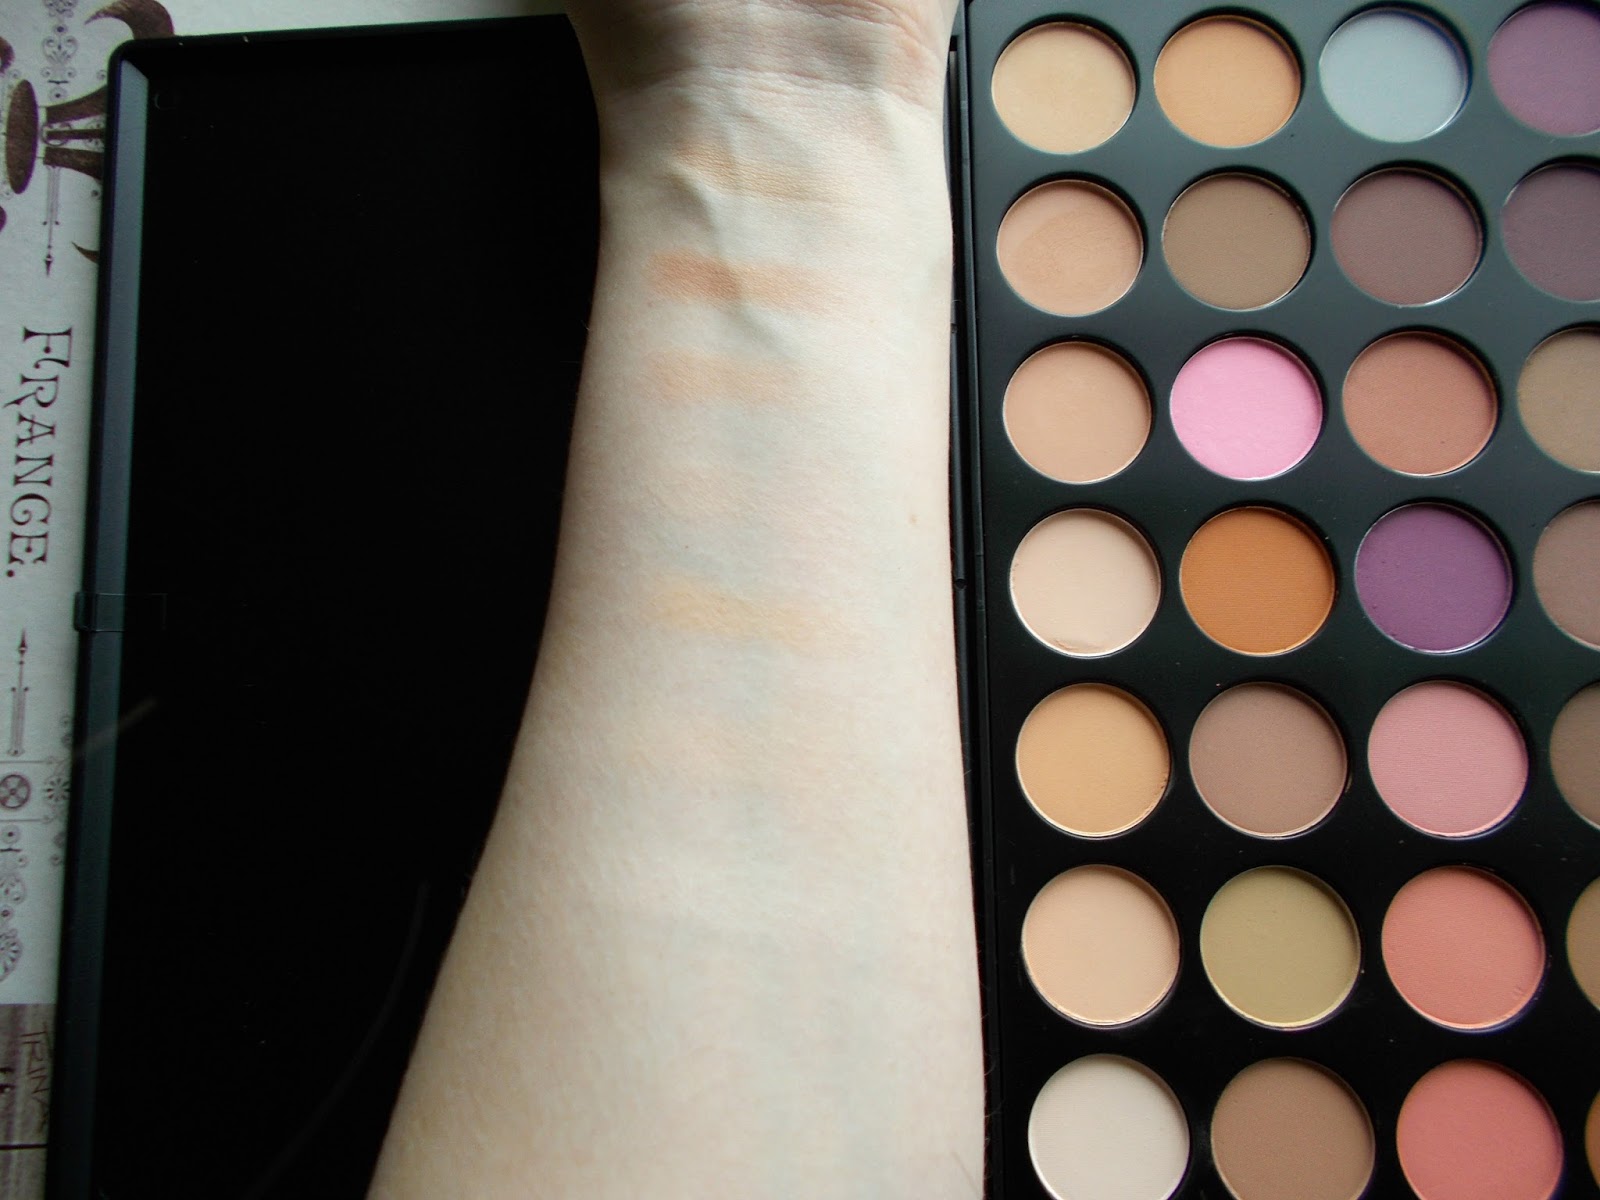 Morphe Brushes BeautyBay review 35N colour matte palette 1st row swatches